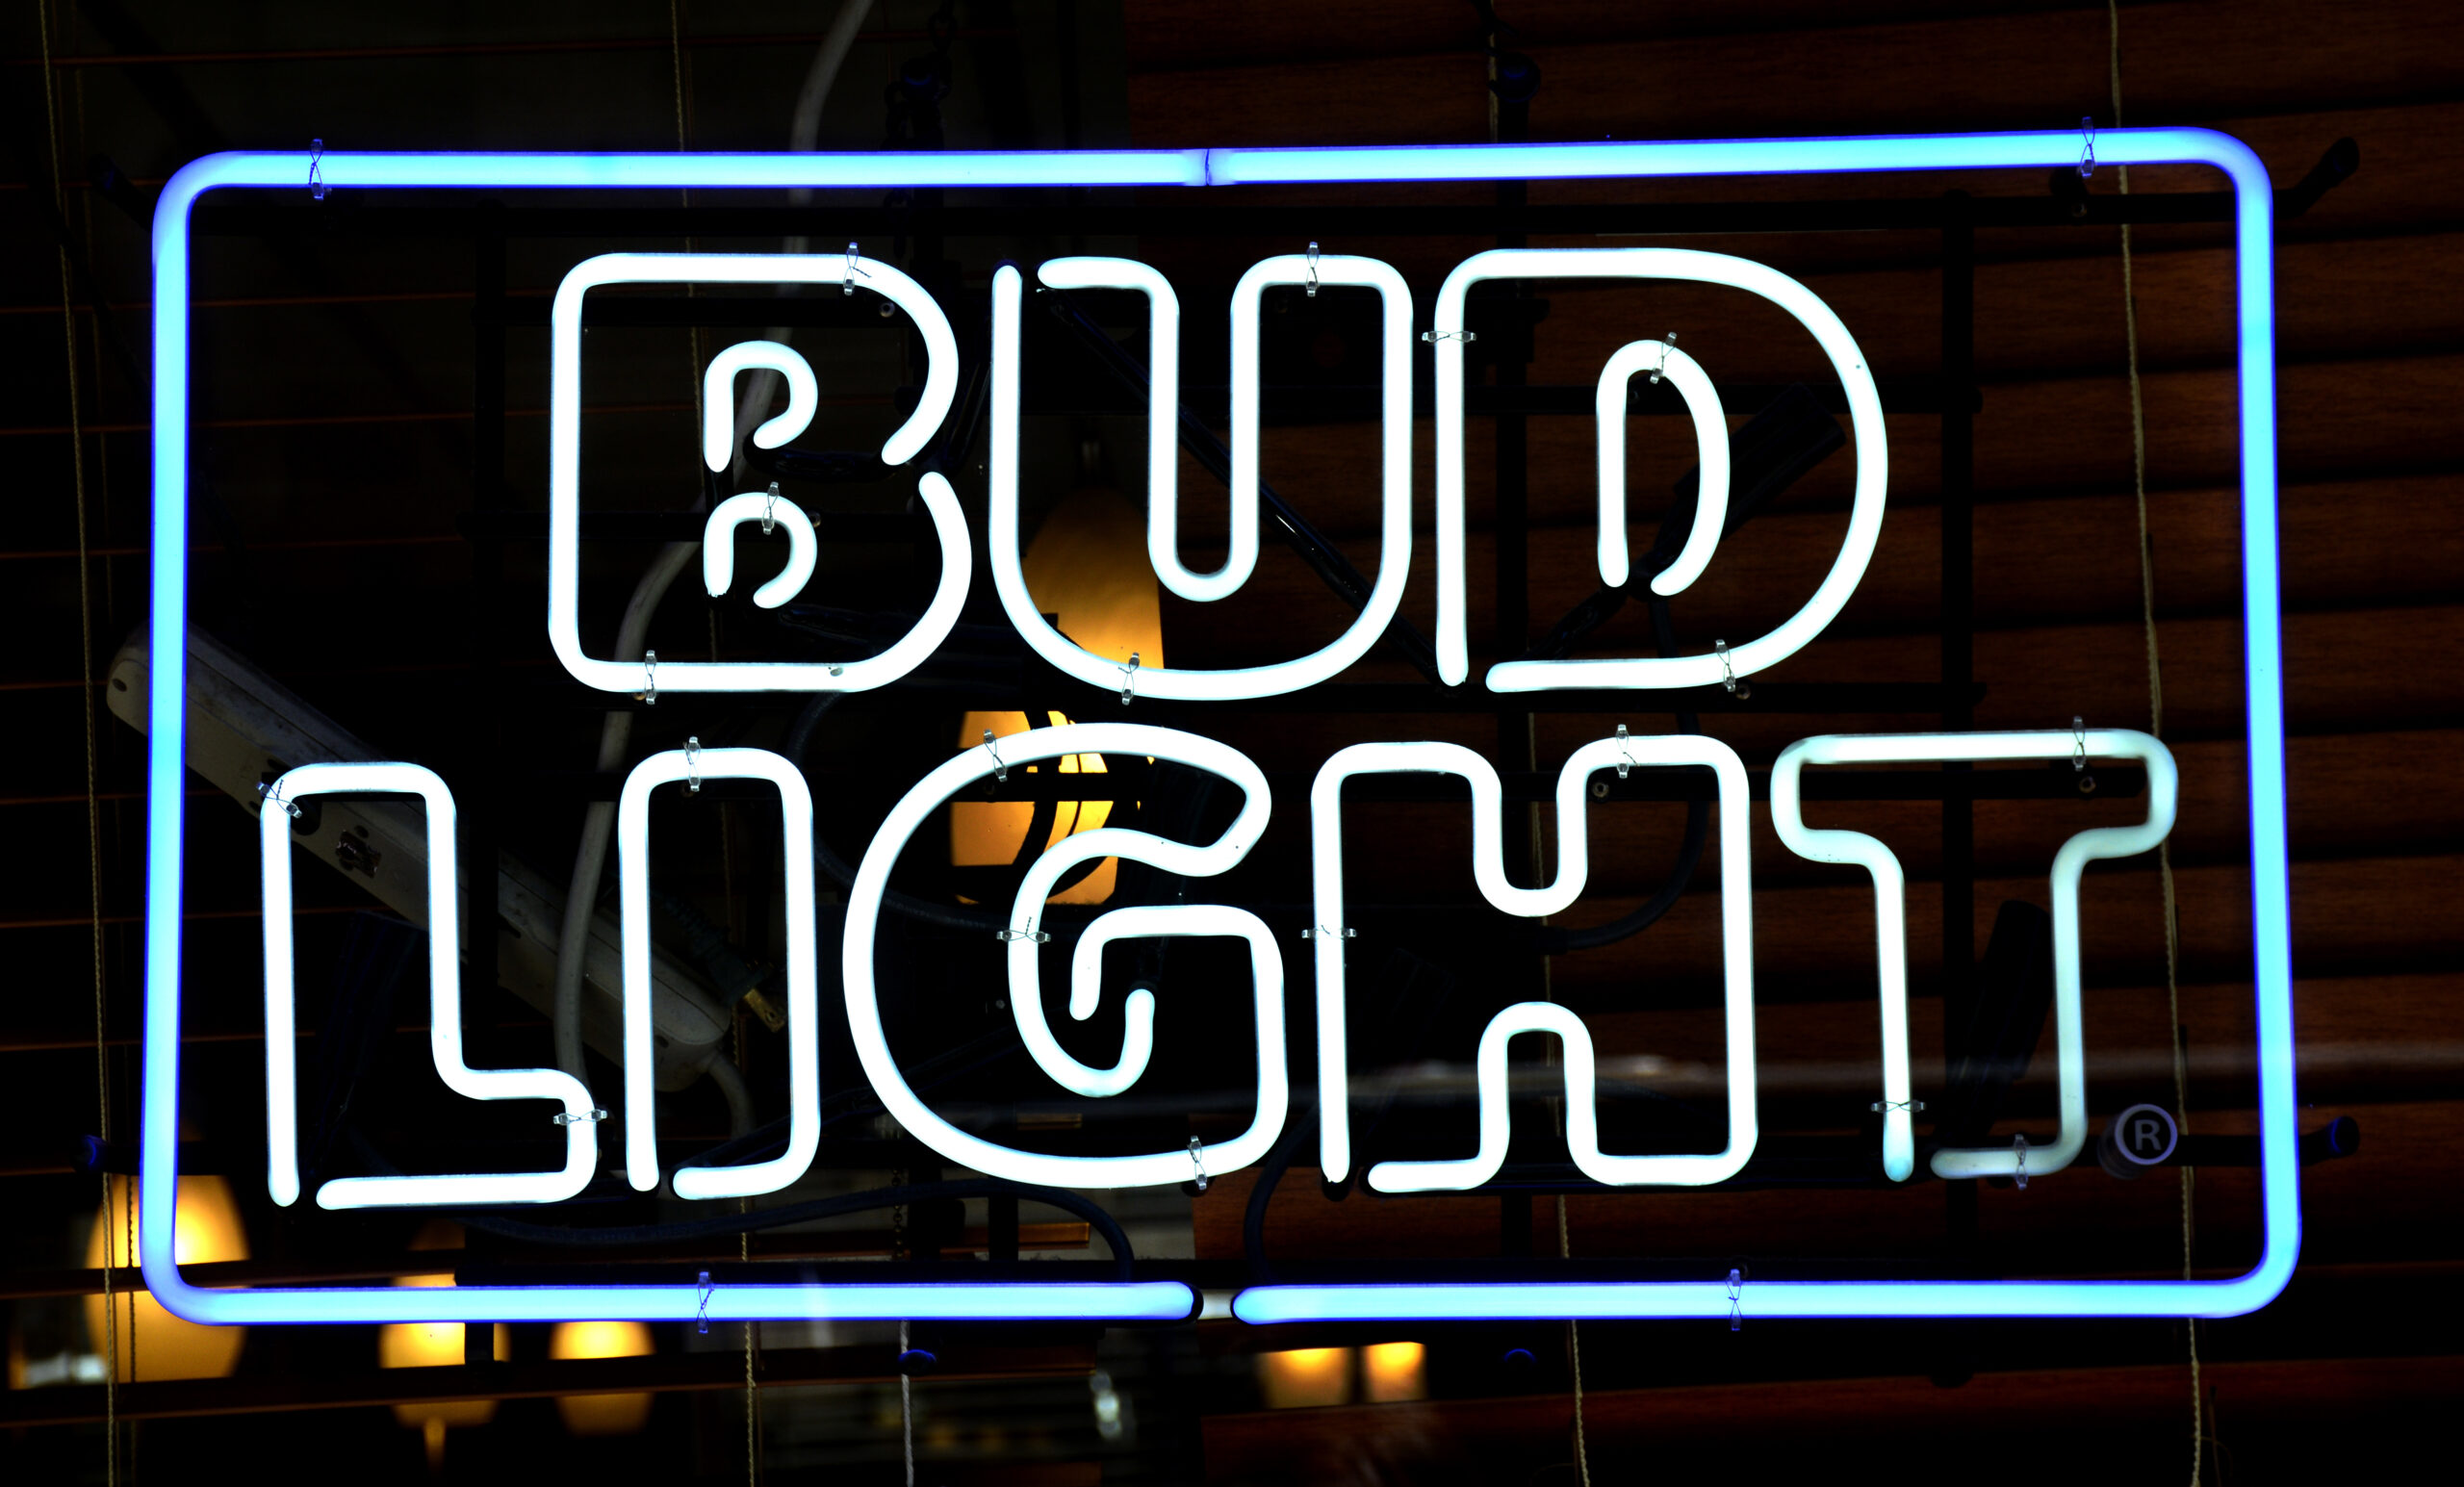 Bud Light Marketing VP Talks About Updating ‘Fratty’ Image With ‘Inclusivity’ Before Mulvaney Partnership